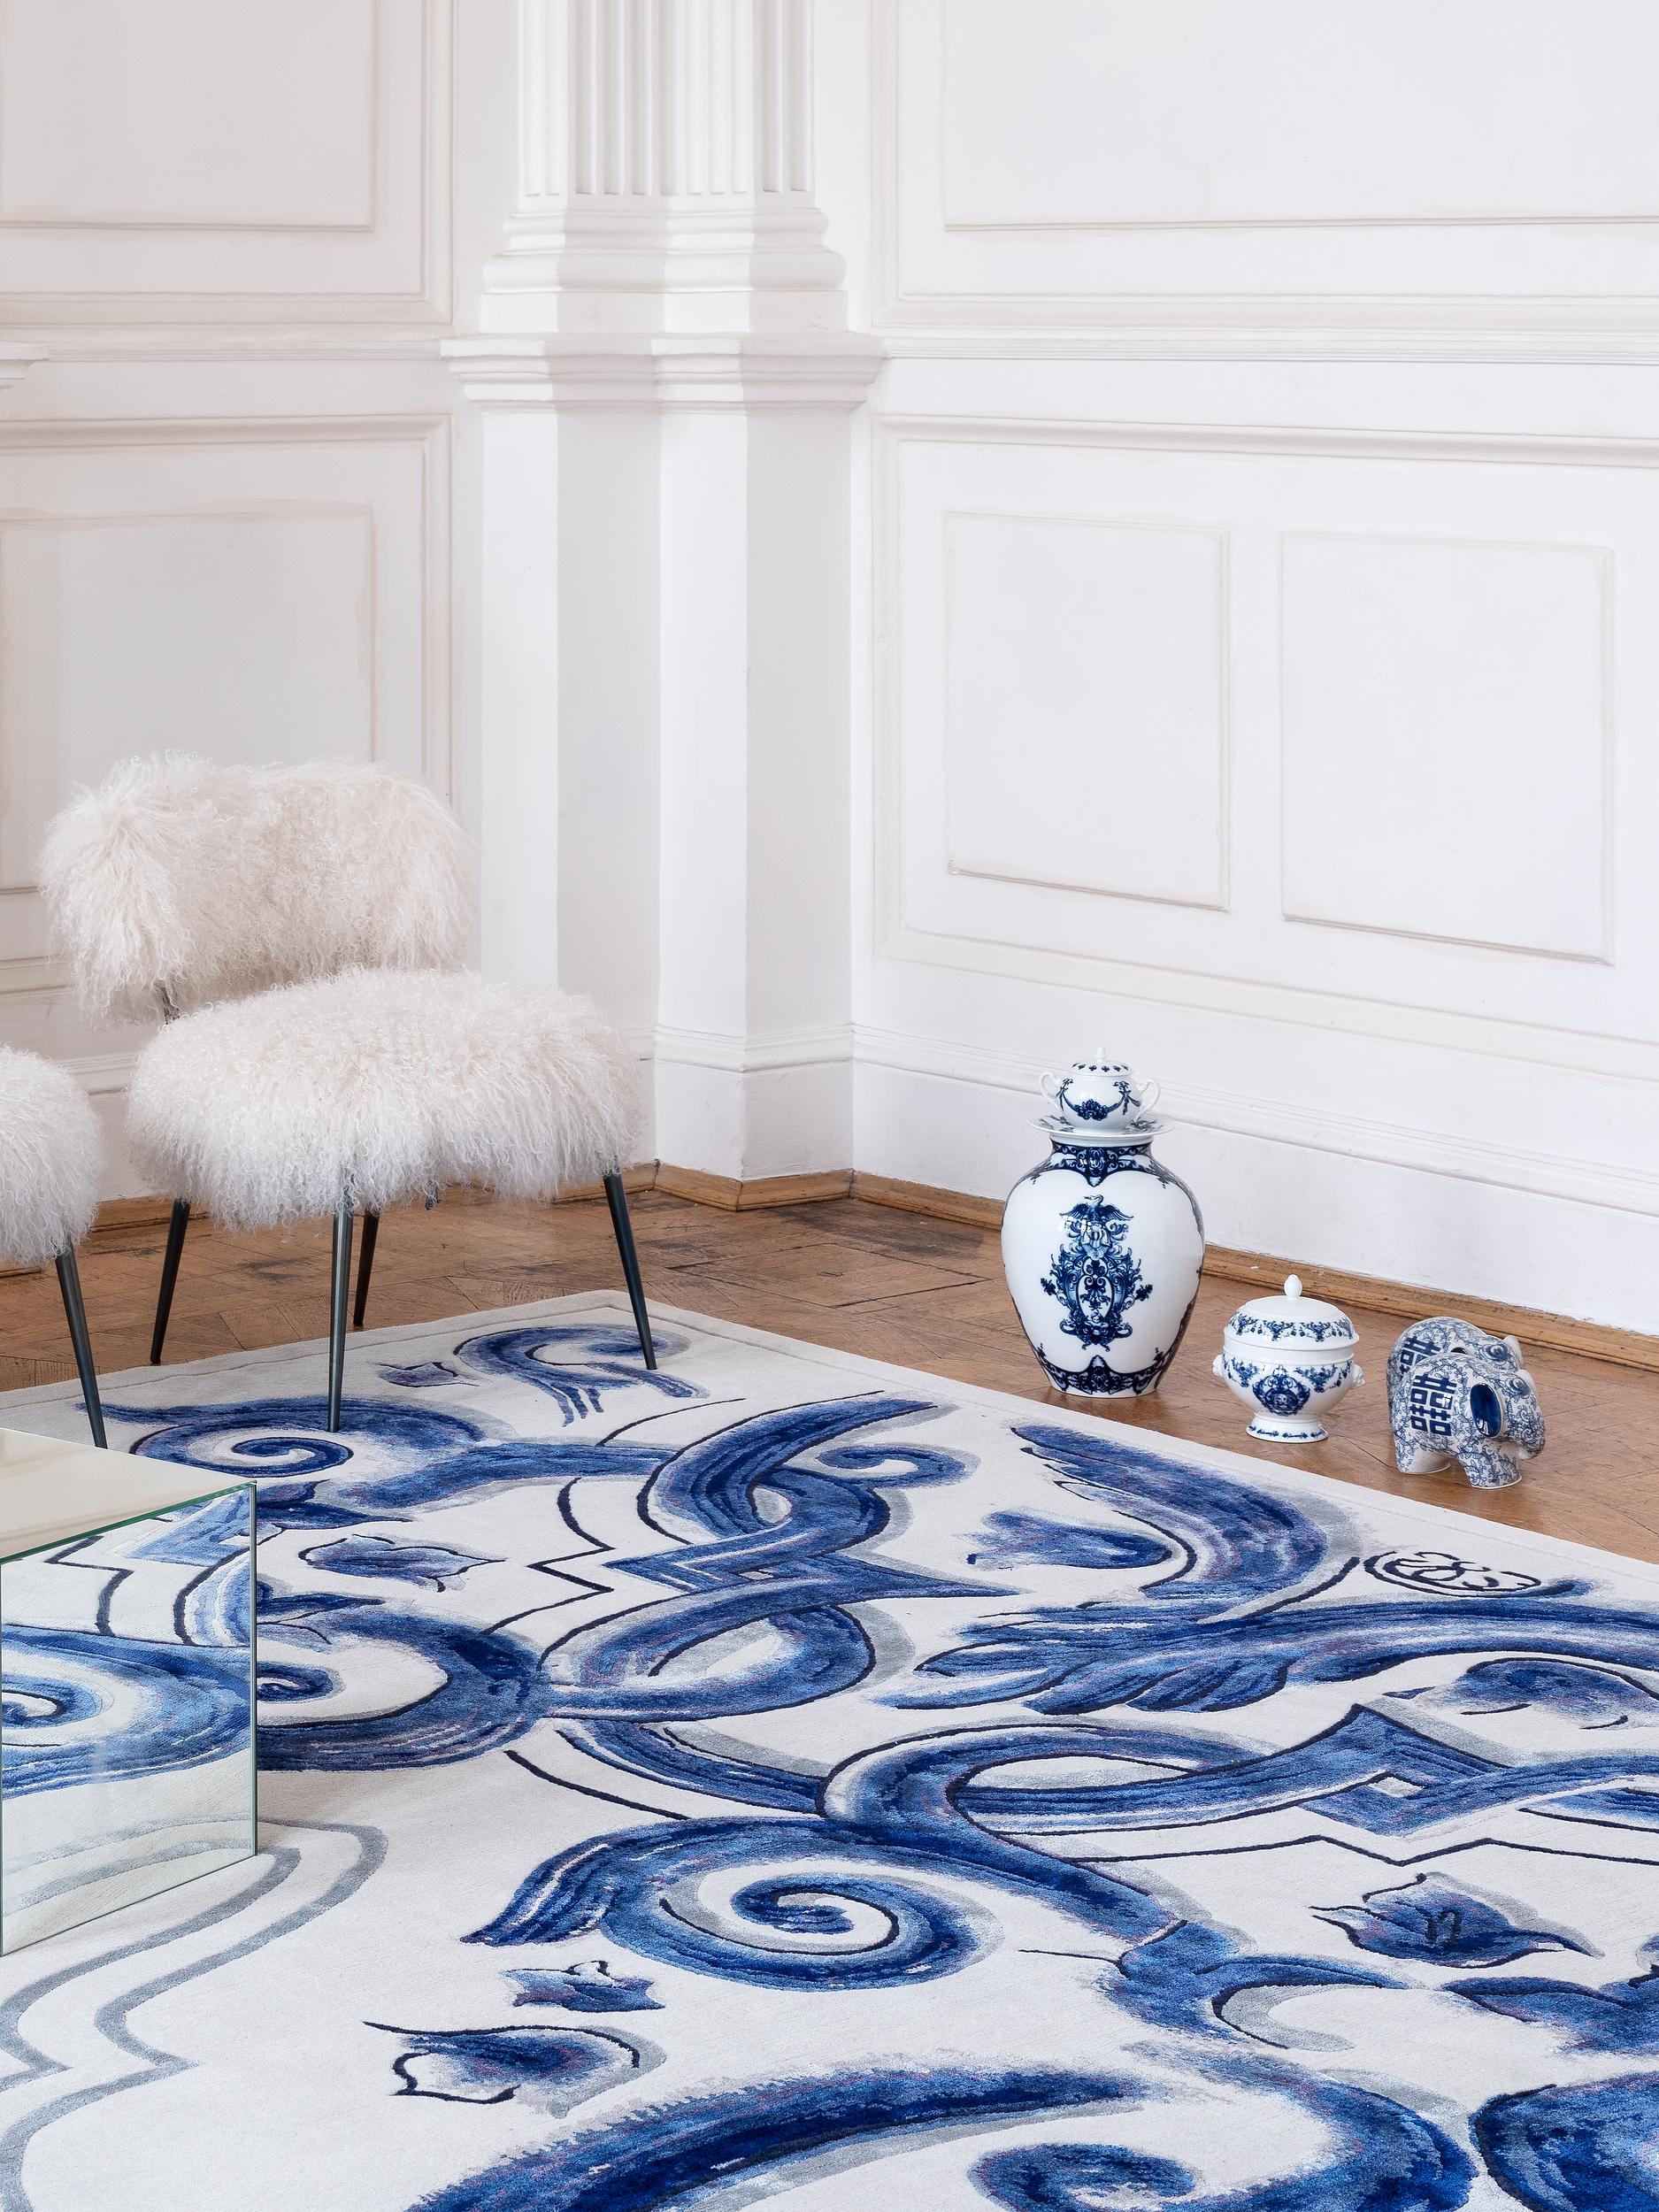 The aesthetics of Chinese porcelain in textiles

The artists of Tapis Rouge continue to pursue innovation, using motifs of characteristic visual effects of artistic techniques in carpet knotting. The white and blue canvas with mirrored ornaments